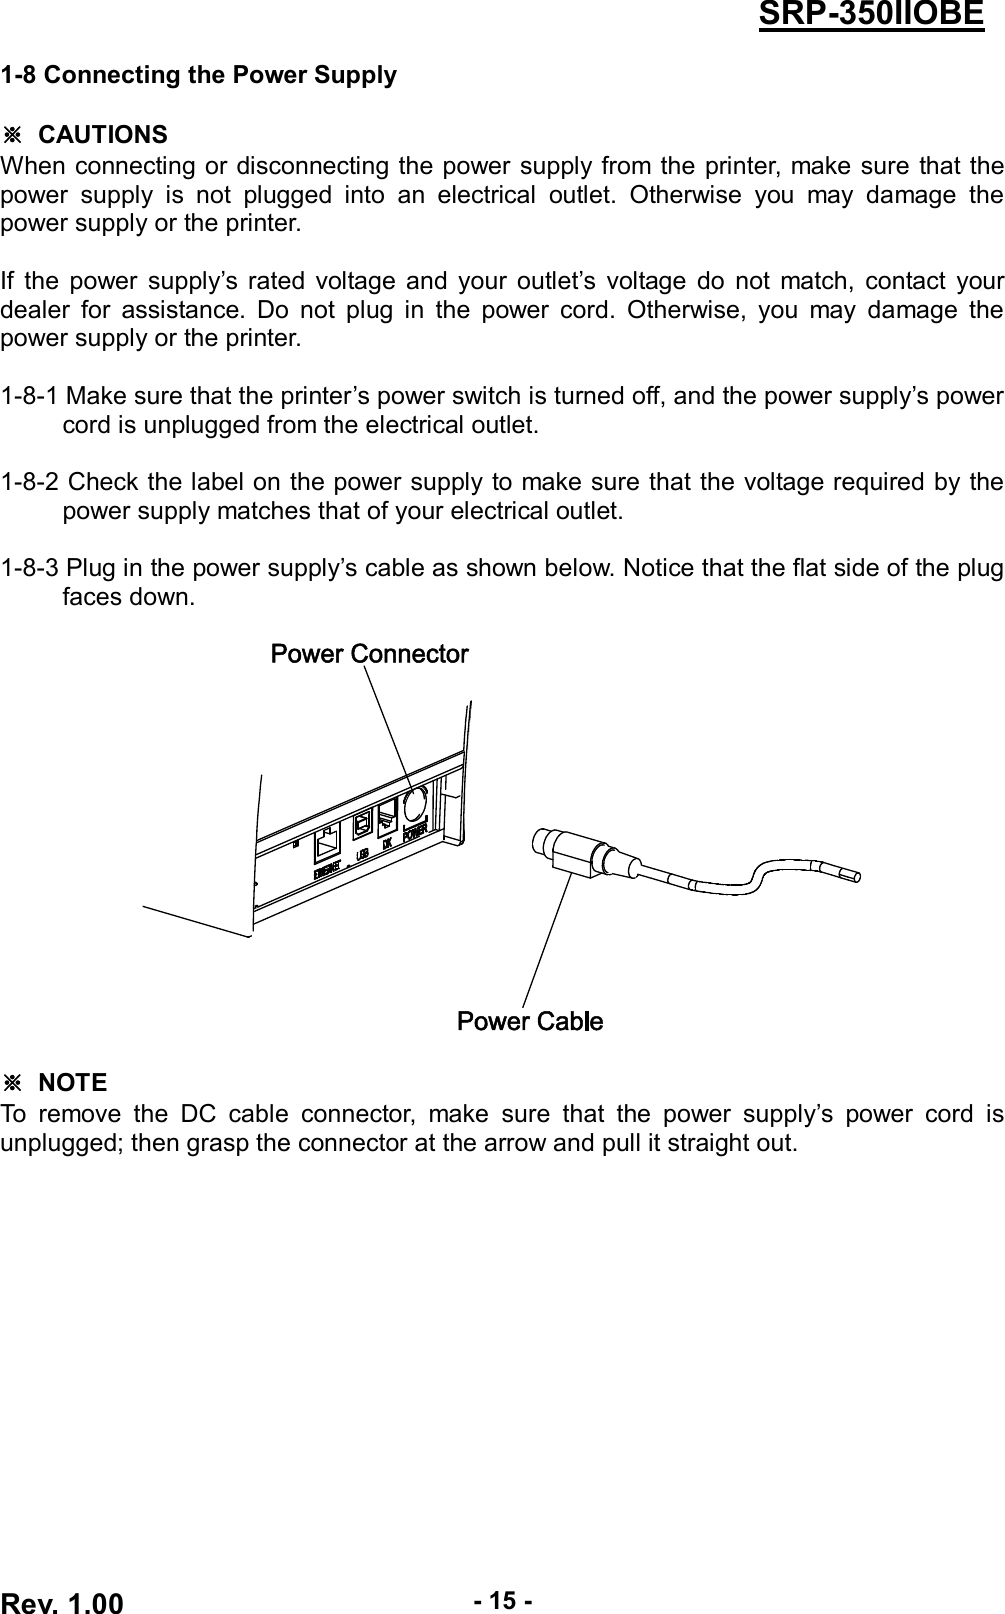  Rev. 1.00 - 15 - SRP-350IIOBE 1-8 Connecting the Power Supply  ※  CAUTIONS When connecting or disconnecting the power supply from  the  printer, make sure that the power  supply  is  not  plugged  into  an  electrical  outlet.  Otherwise  you  may  damage  the power supply or the printer.  If  the  power  supply’s rated  voltage  and  your  outlet’s  voltage  do  not  match,  contact  your dealer  for  assistance.  Do  not  plug  in  the  power  cord.  Otherwise,  you  may  damage  the power supply or the printer.  1-8-1 Make sure that the printer’s power switch is turned off, and the power supply’s power cord is unplugged from the electrical outlet.  1-8-2 Check the label on the power supply to make sure that the voltage required by the power supply matches that of your electrical outlet.  1-8-3 Plug in the power supply’s cable as shown below. Notice that the flat side of the plug faces down.    ※  NOTE To  remove  the  DC  cable  connector,  make  sure  that  the  power  supply’s  power  cord  is unplugged; then grasp the connector at the arrow and pull it straight out. 